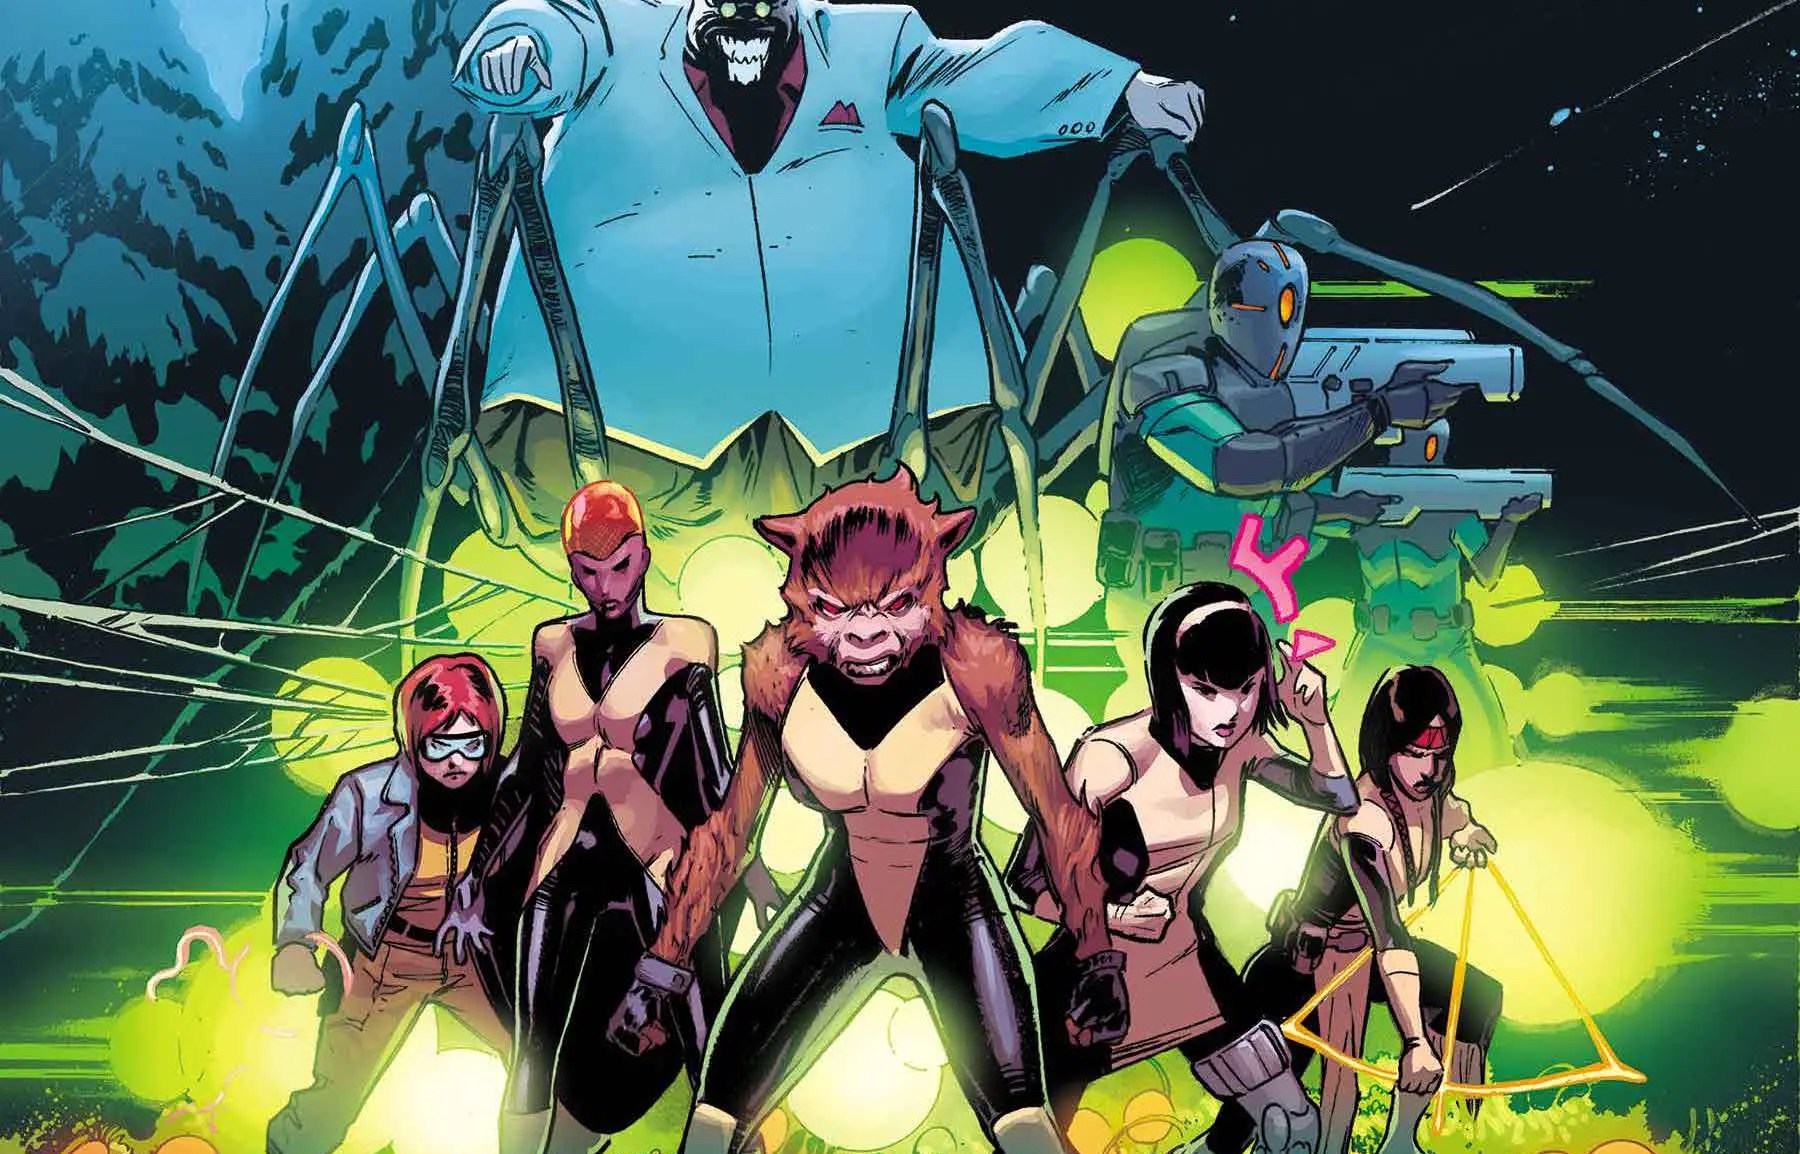 'New Mutants: Lethal Legion' #1 offers great wisdom and insight